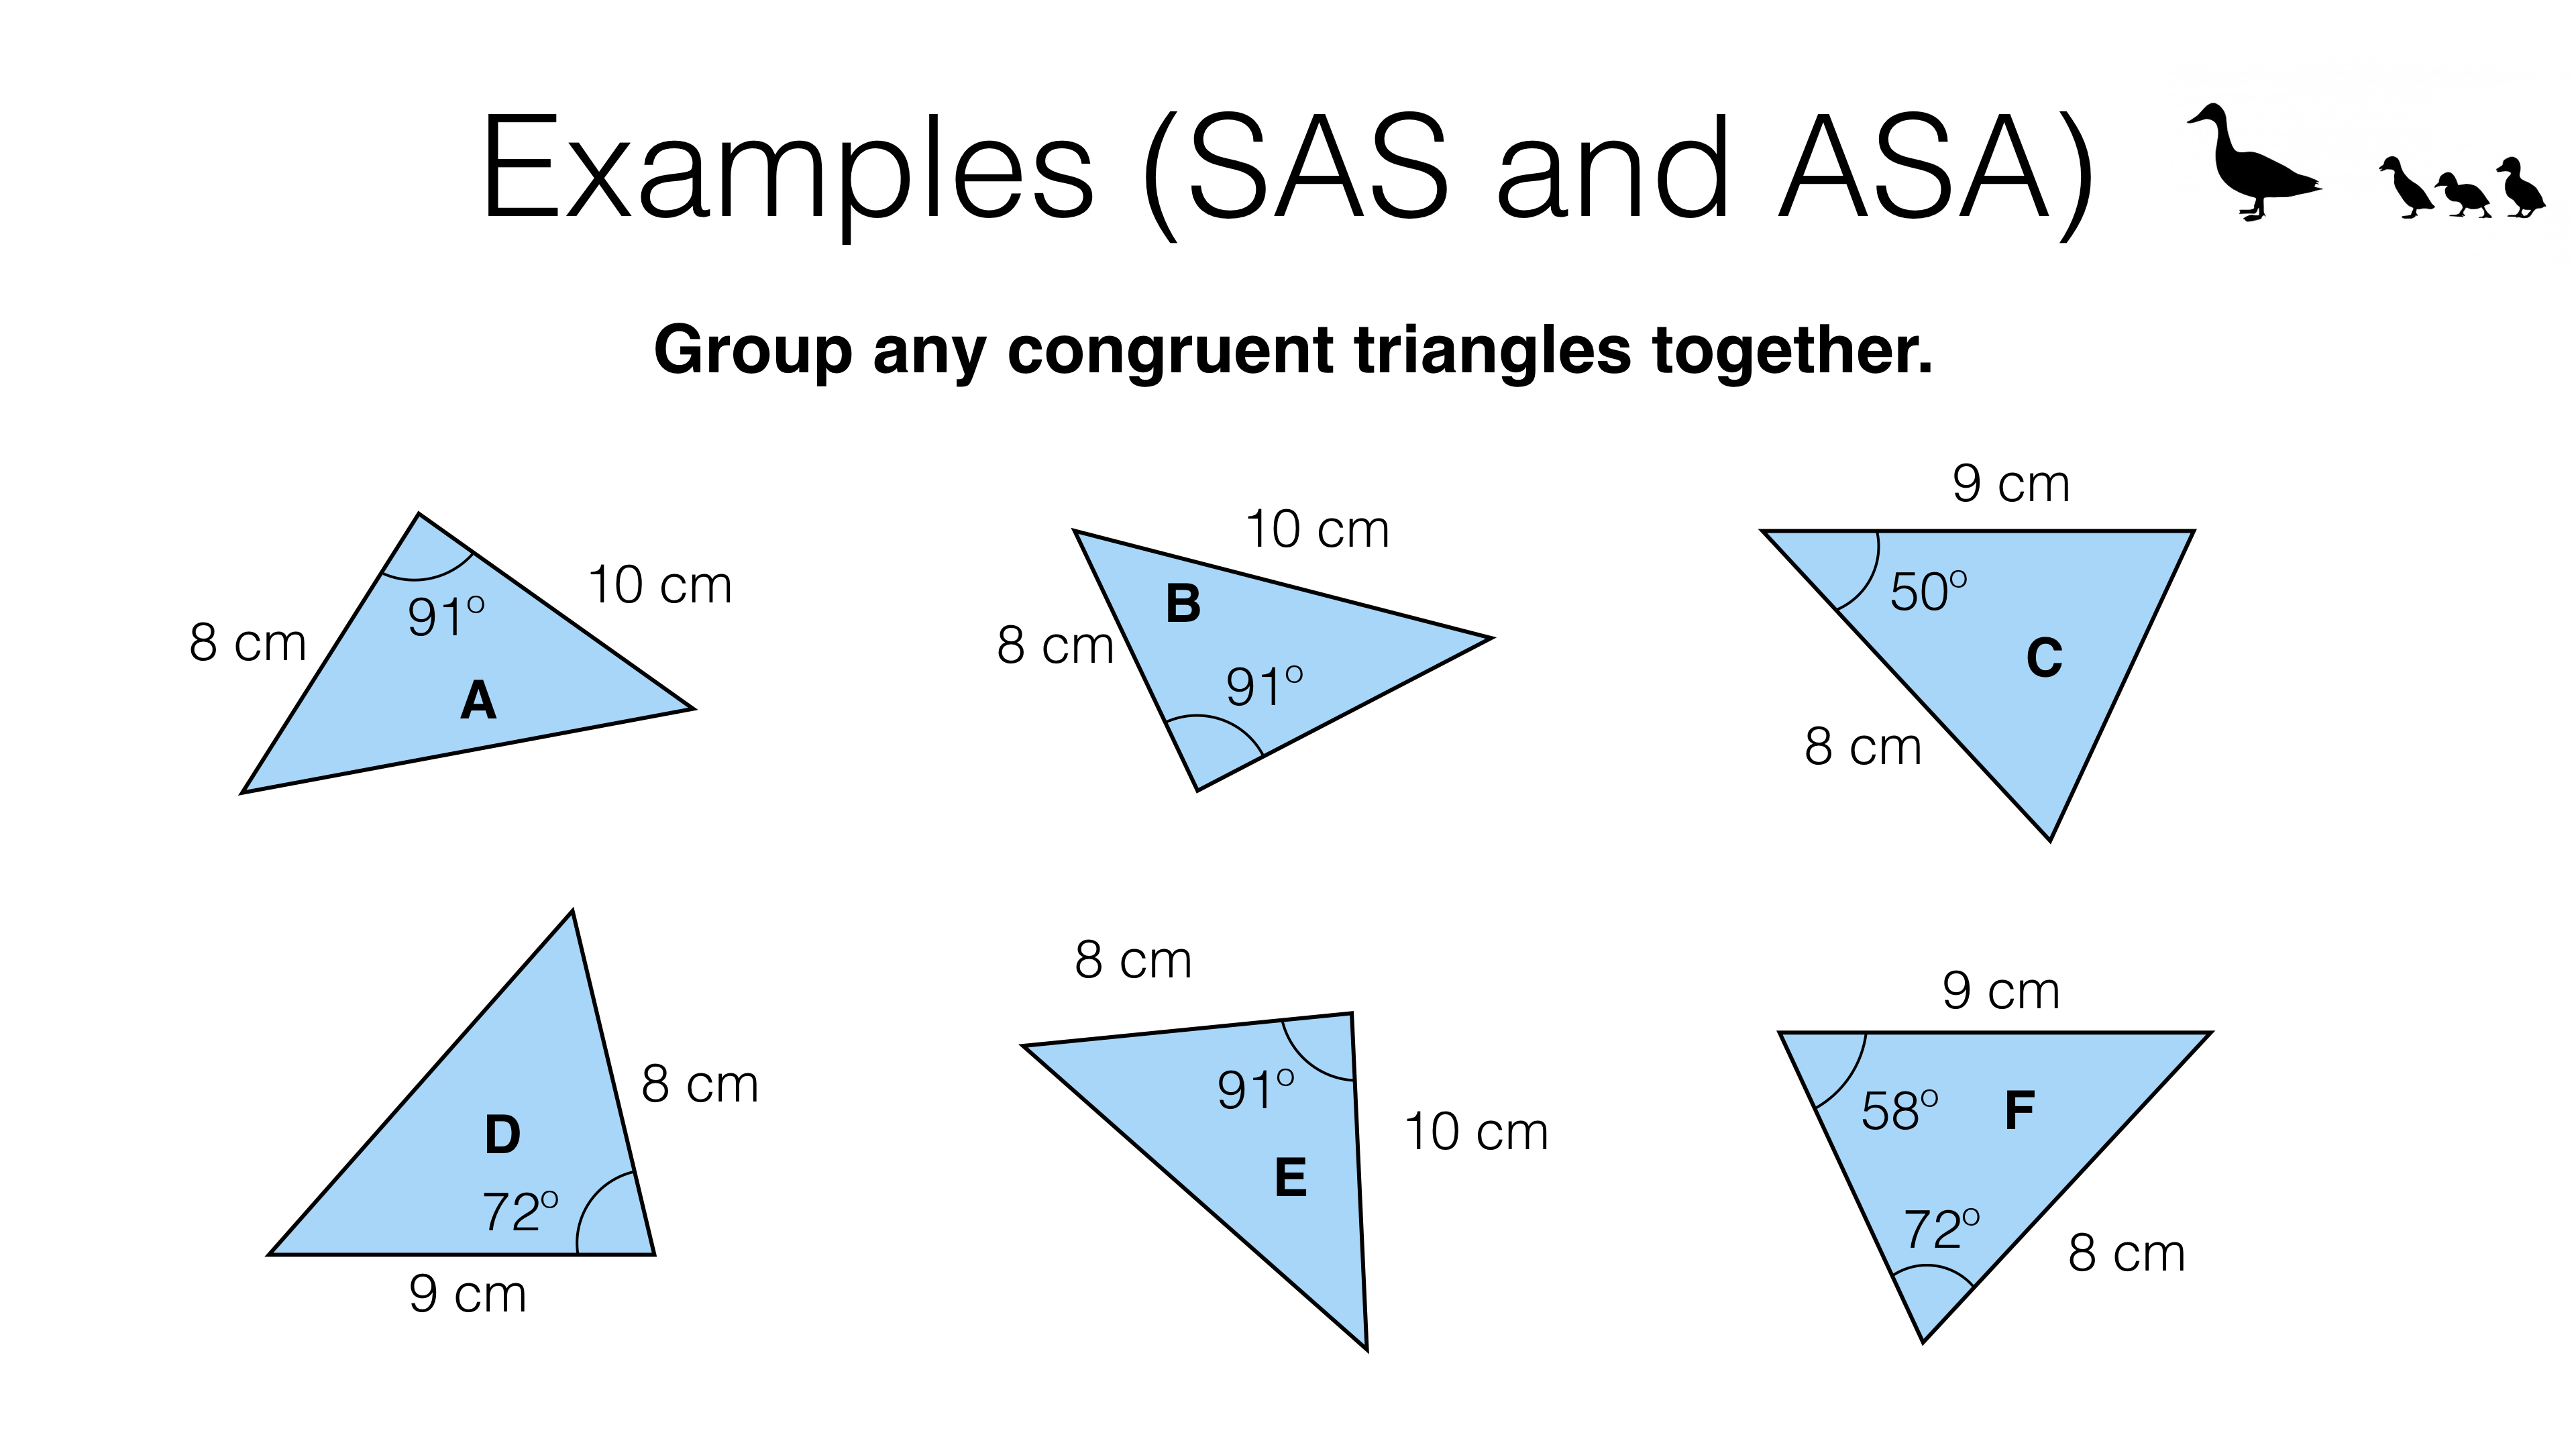 G24a – Congruence criteria for triangles (SSS, SAS, ASA, RHS Intended For Congruent Triangles Worksheet With Answers